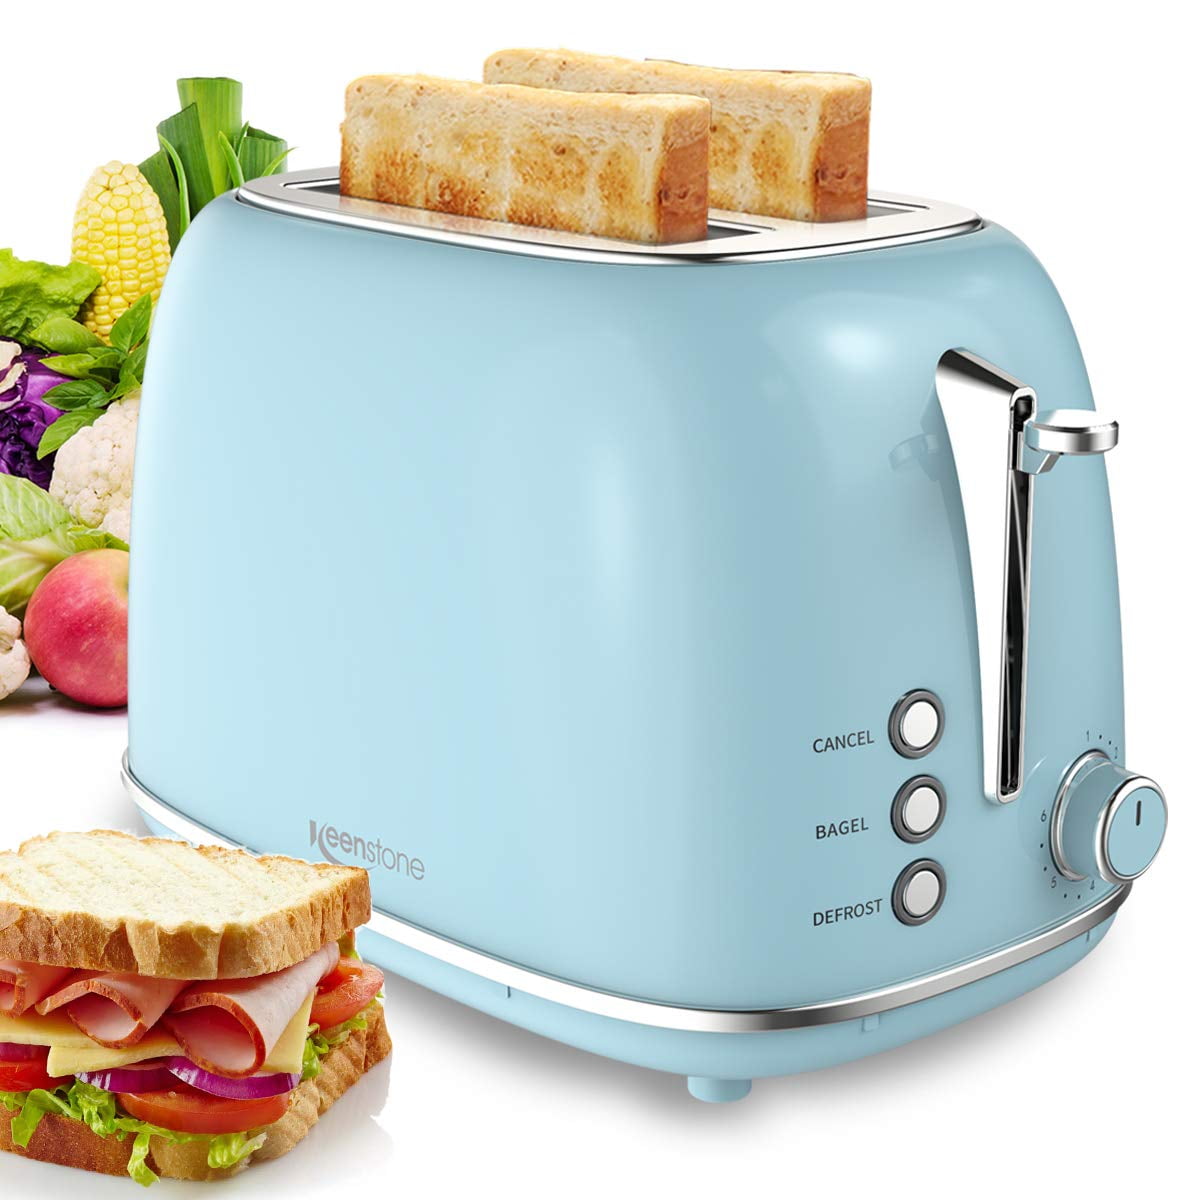 YOPIDOFO Toaster 2 Slice Cancel Stainless Steel Toaster with 6 Bread Shade Setting and Bagel Defrost Function for Bread Waffles Muffins 